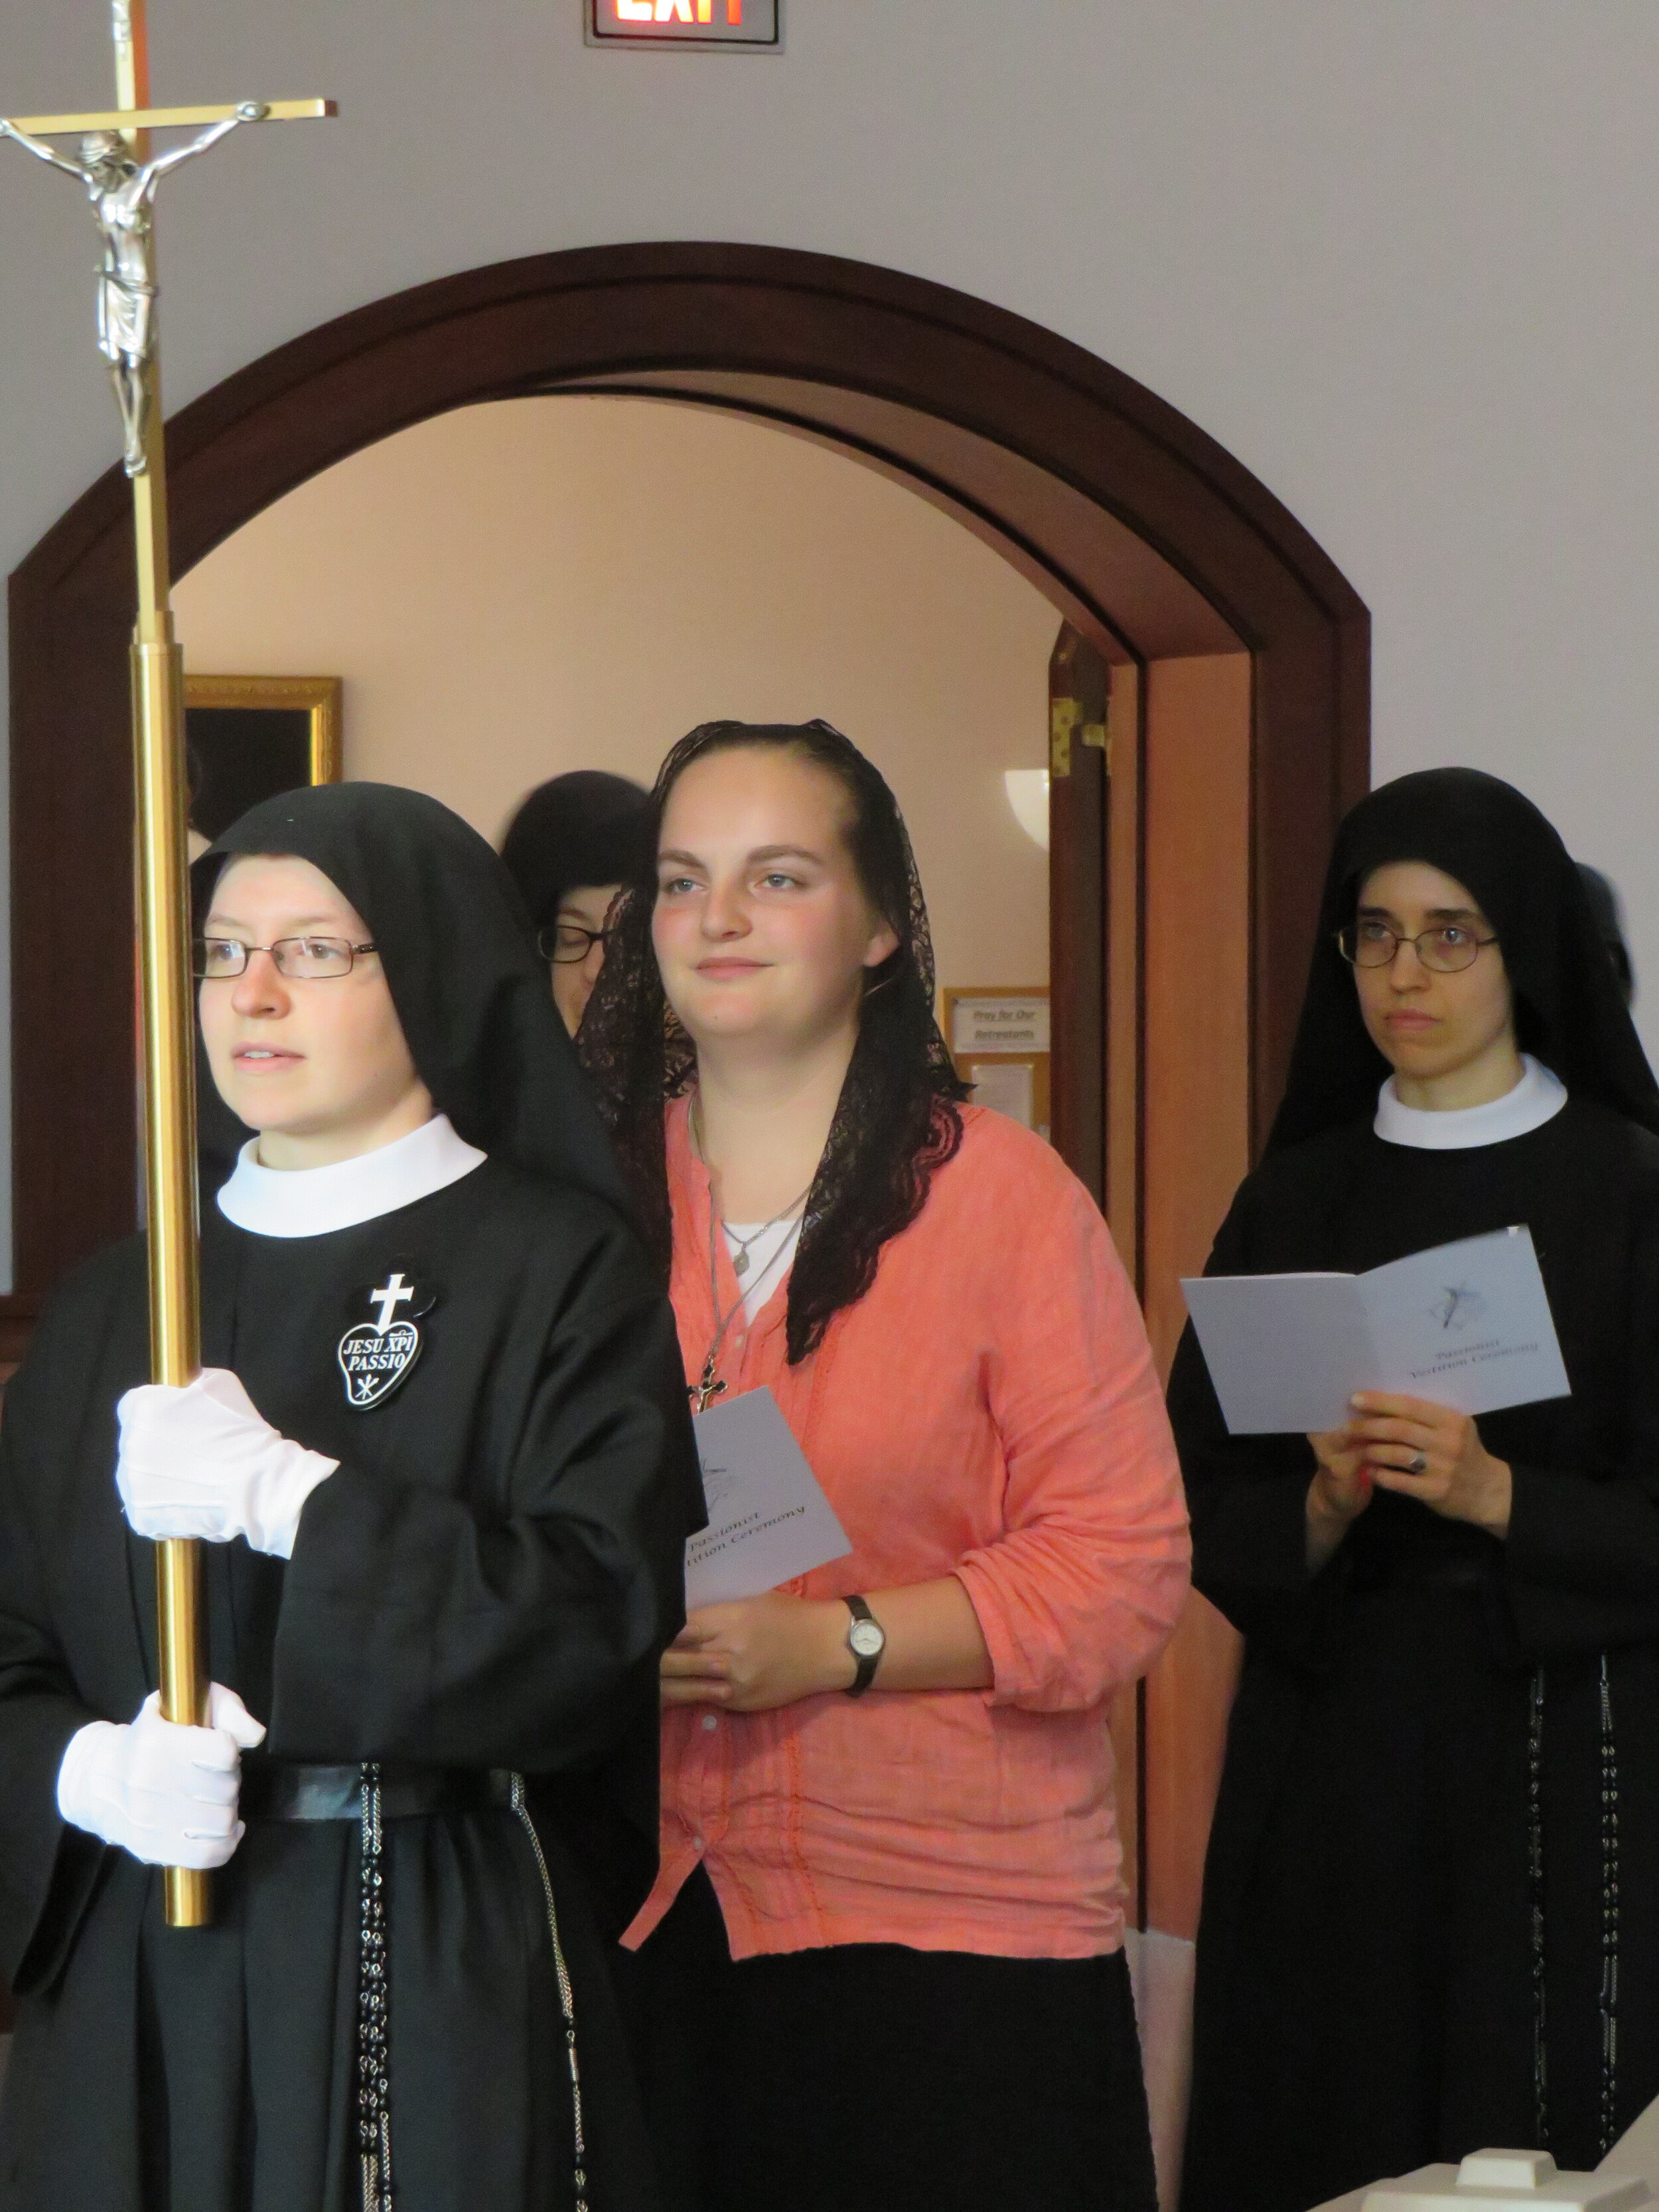  The entrance procession; each of the professed nuns carries a votive light to be place around the image of Our Holy Founder, St. Paul of the Cross.  Pictured here are Sr. Frances Marie, aspirant Abbey, and Sr. Mary Andrea. 